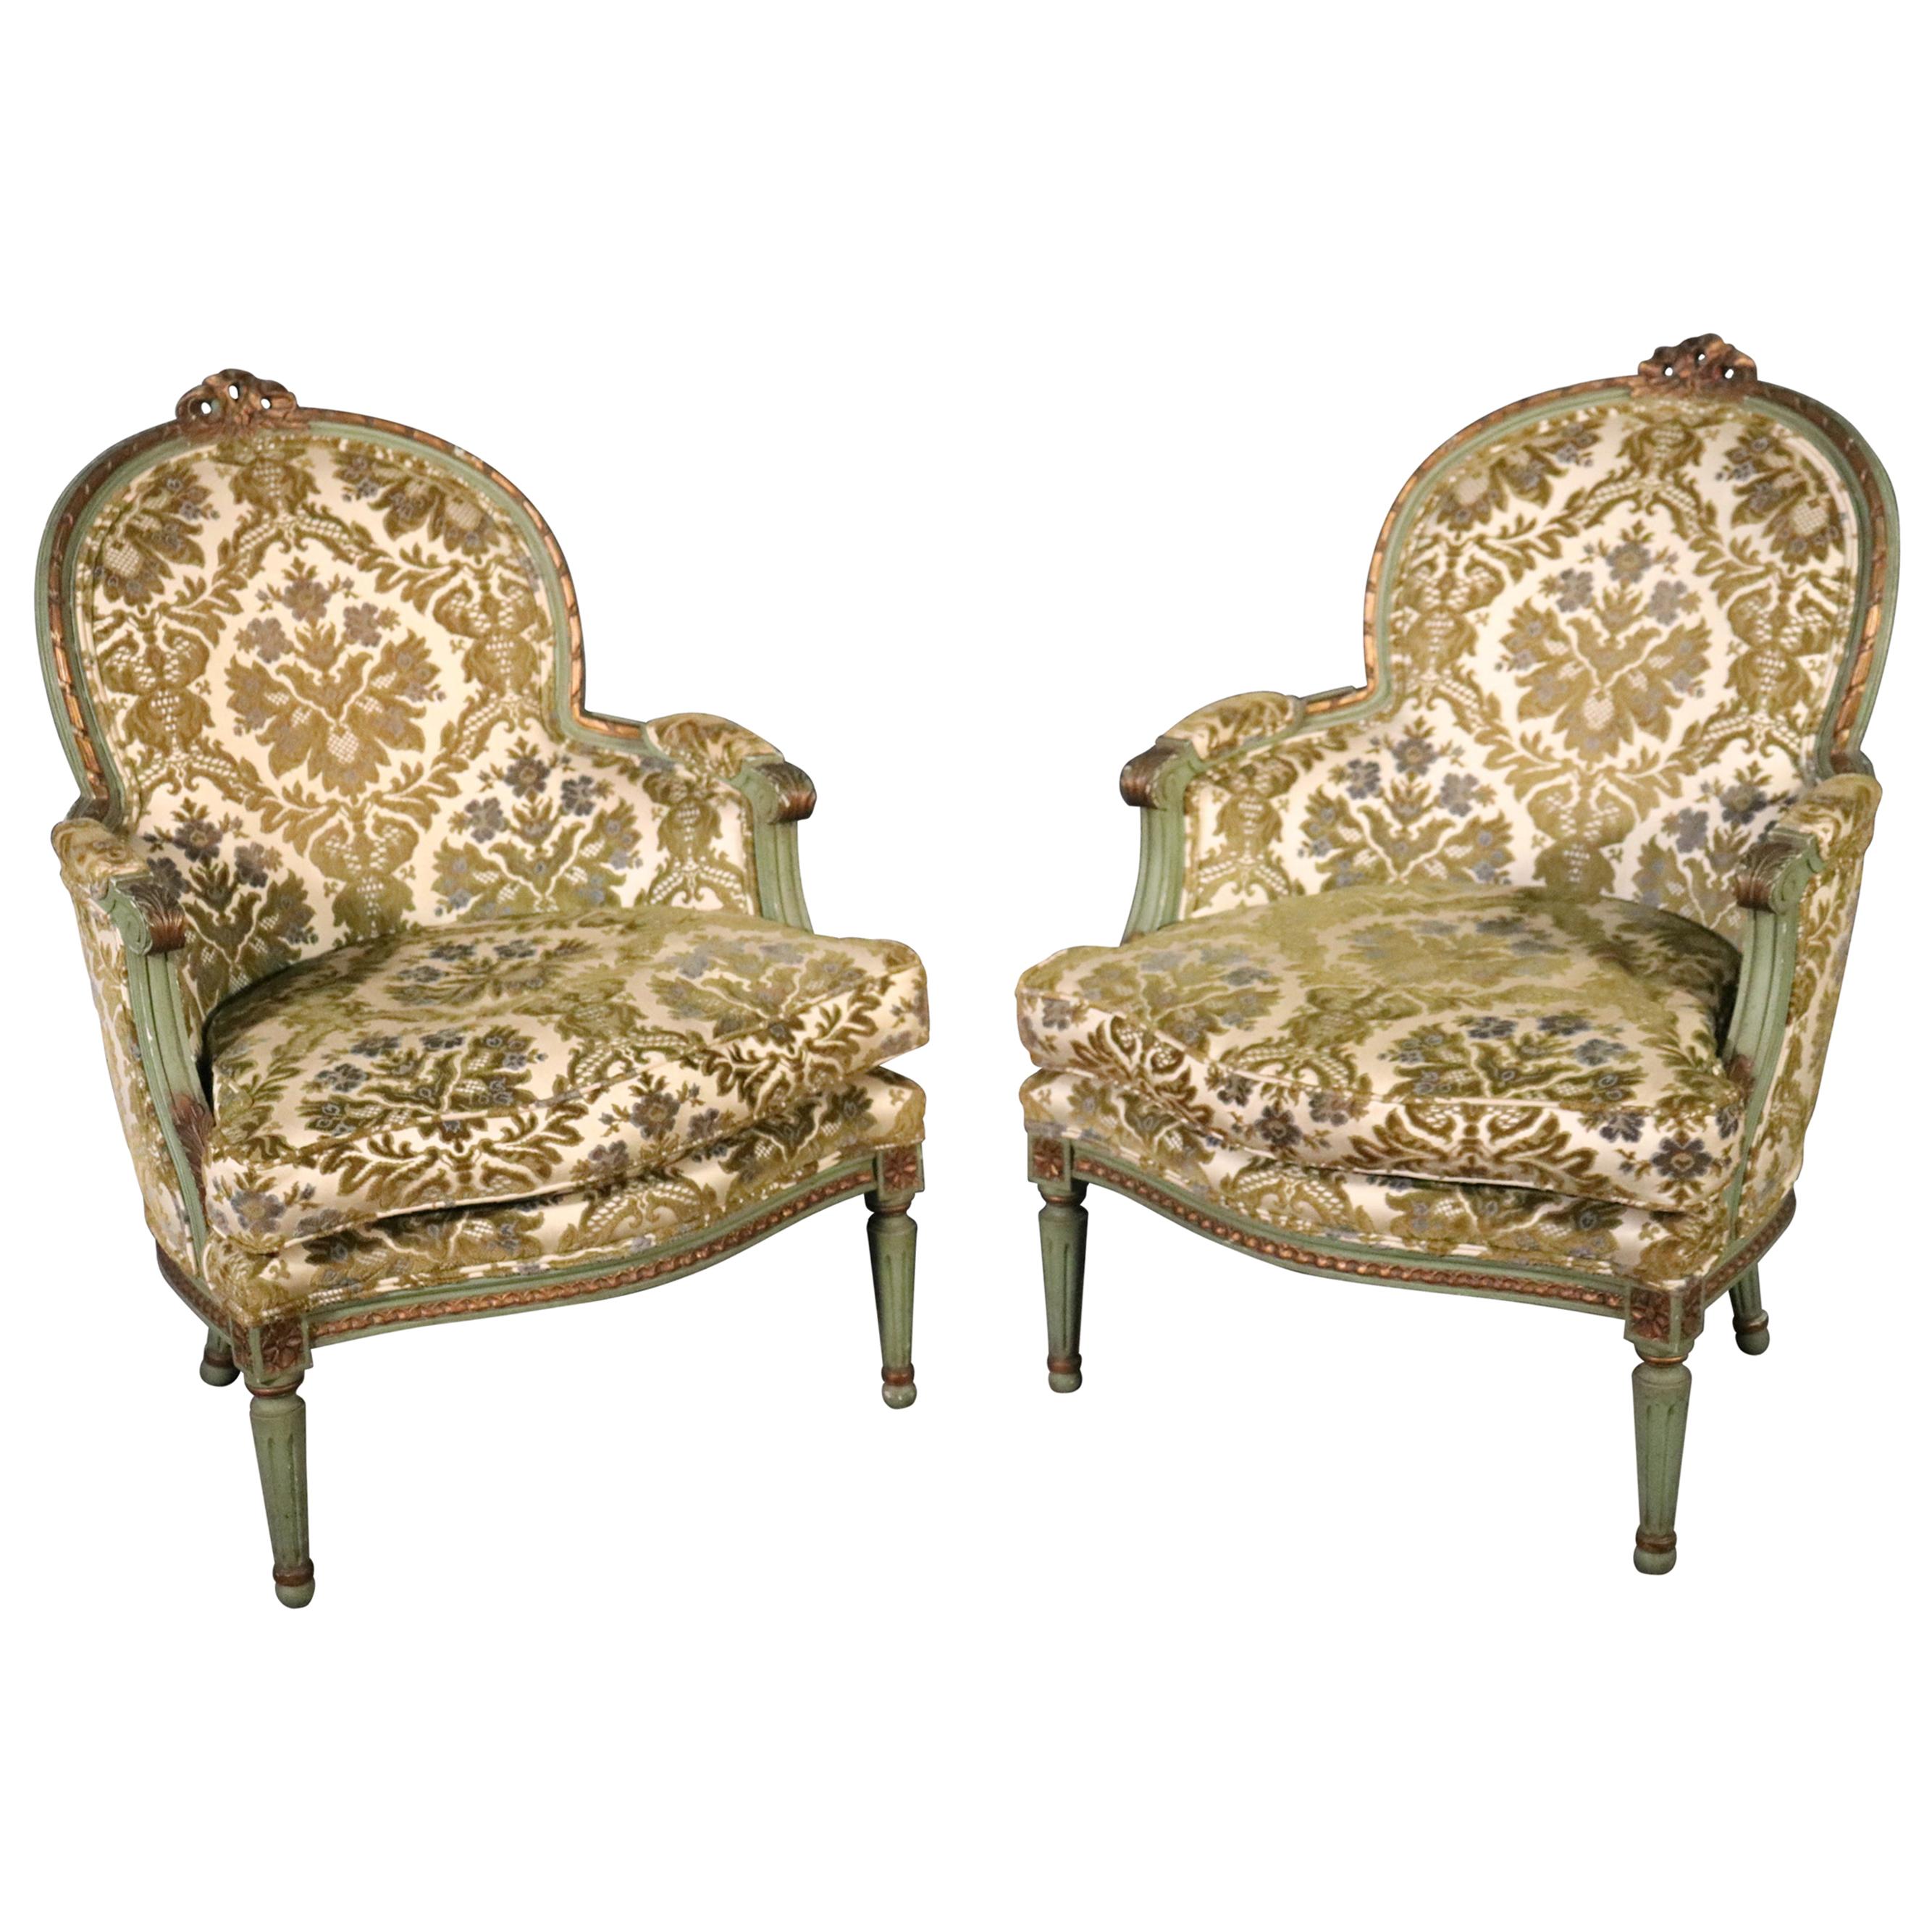 Pair of French Louis XV Style Green Painted Bergere Chairs, Circa 1950s